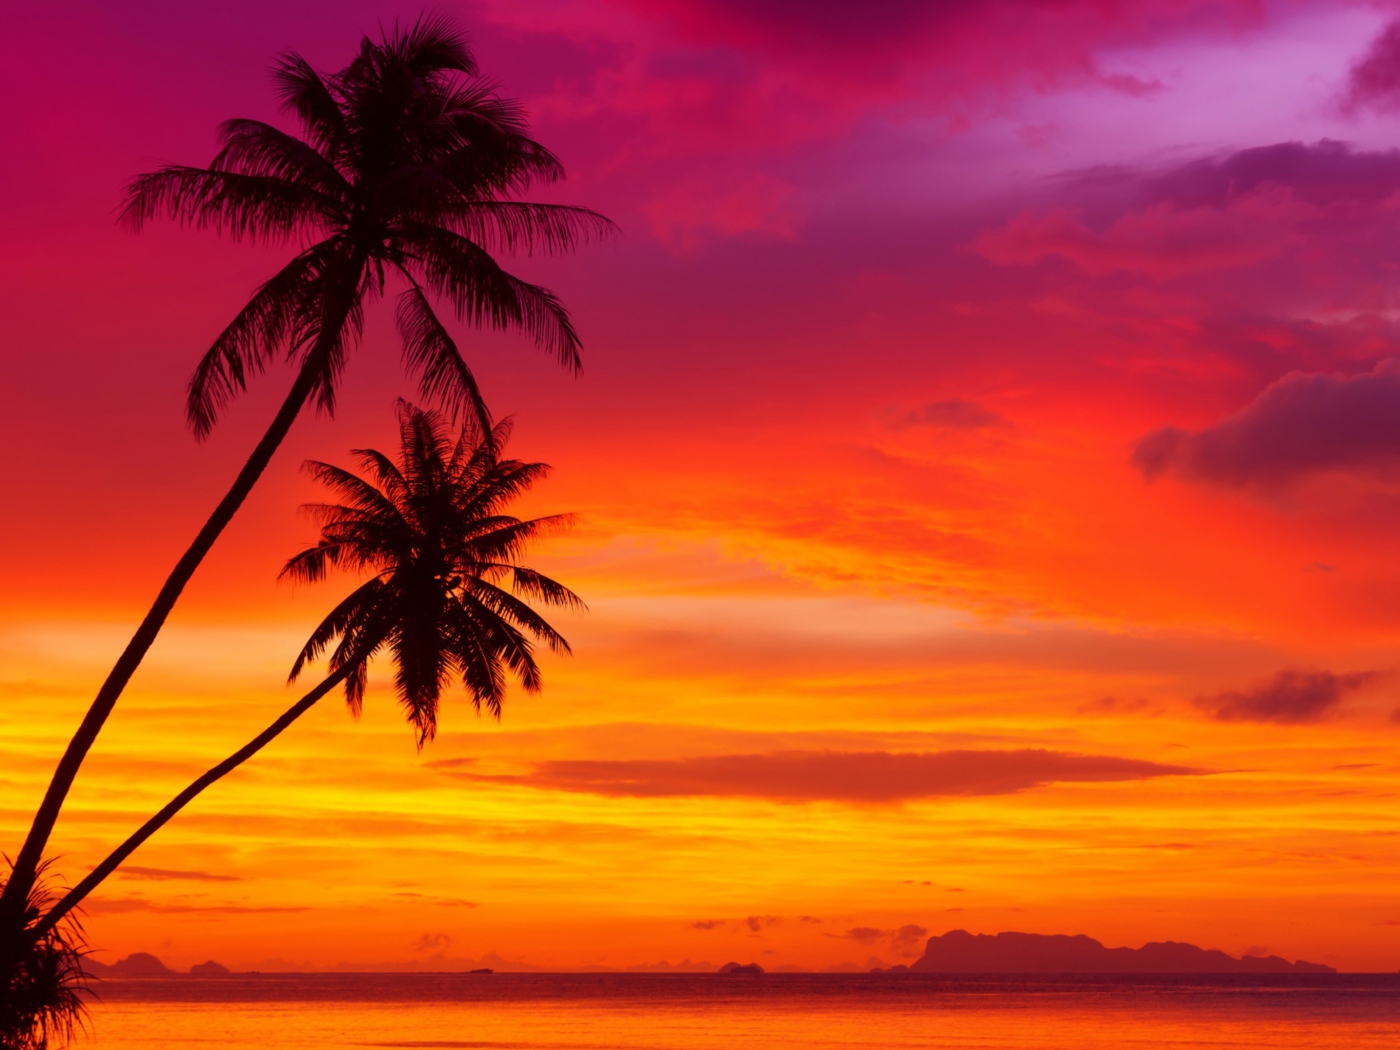 Amazing Pink And Orange Tropical Sunset wallpaper 1400x1050